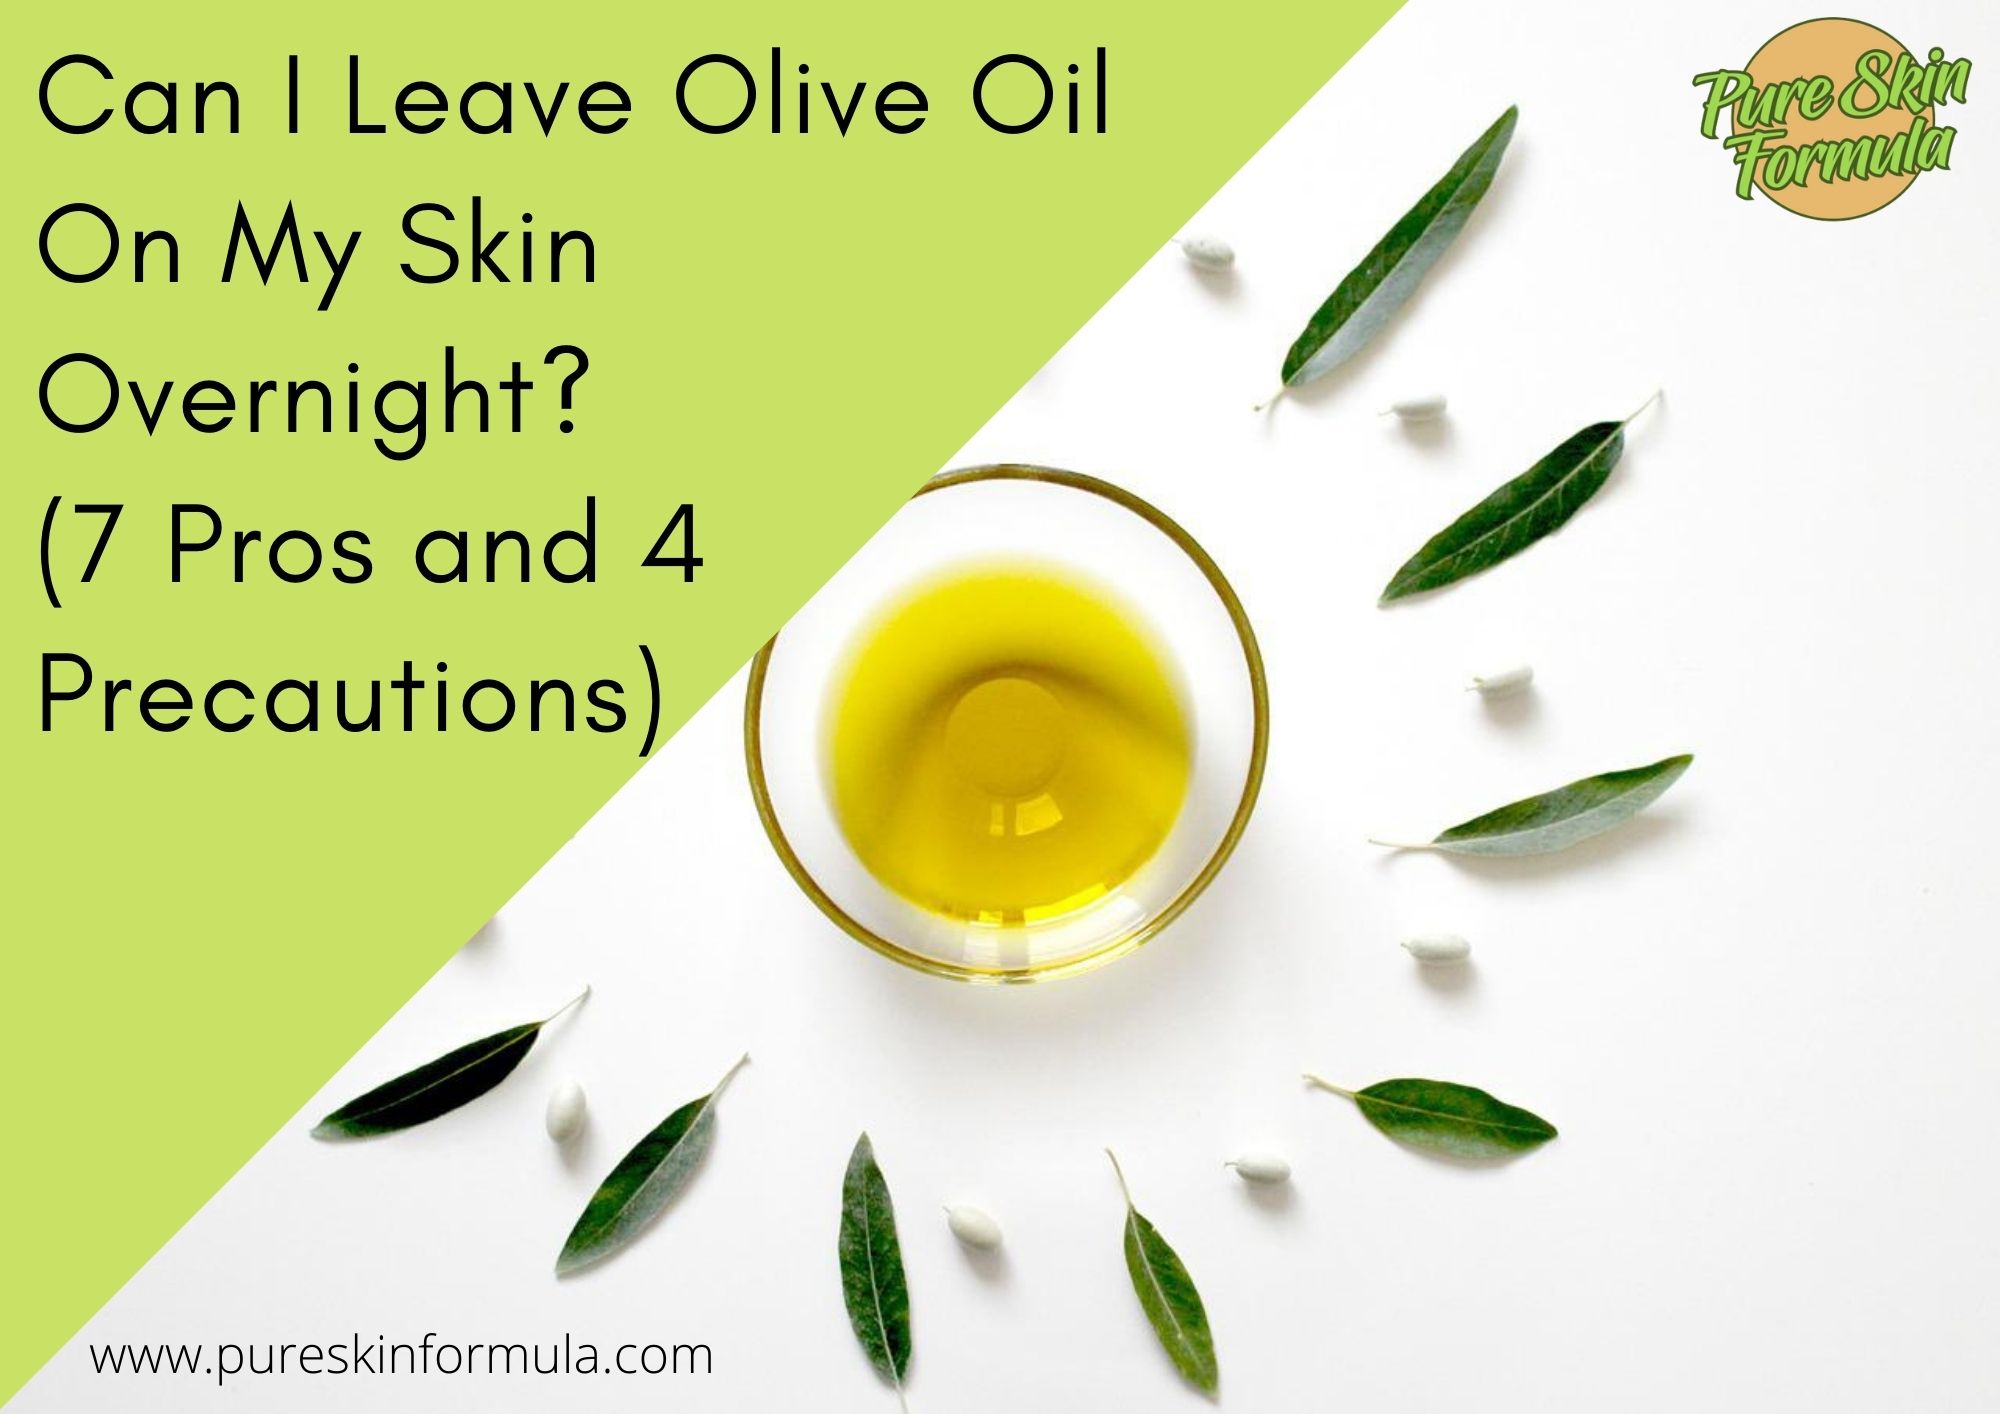 Can I leave olive oil on my skin